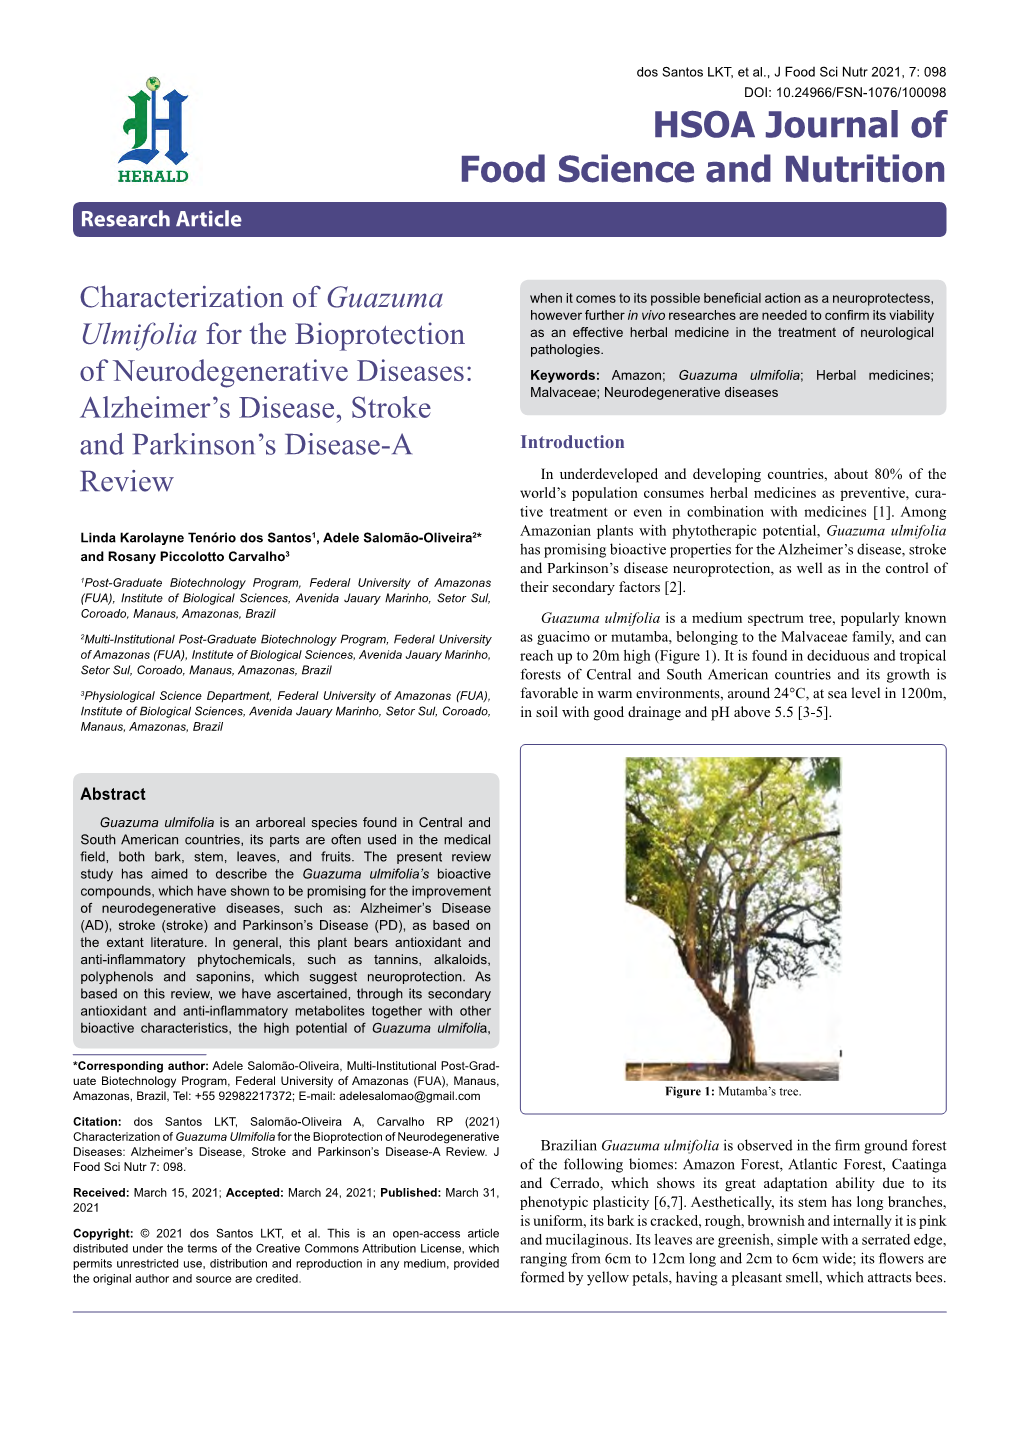 Characterization of Guazuma Ulmifolia for the Bioprotection of Neurodegenerative Diseases: Alzheimer’S Disease, Stroke and Parkinson’S Disease-A Review